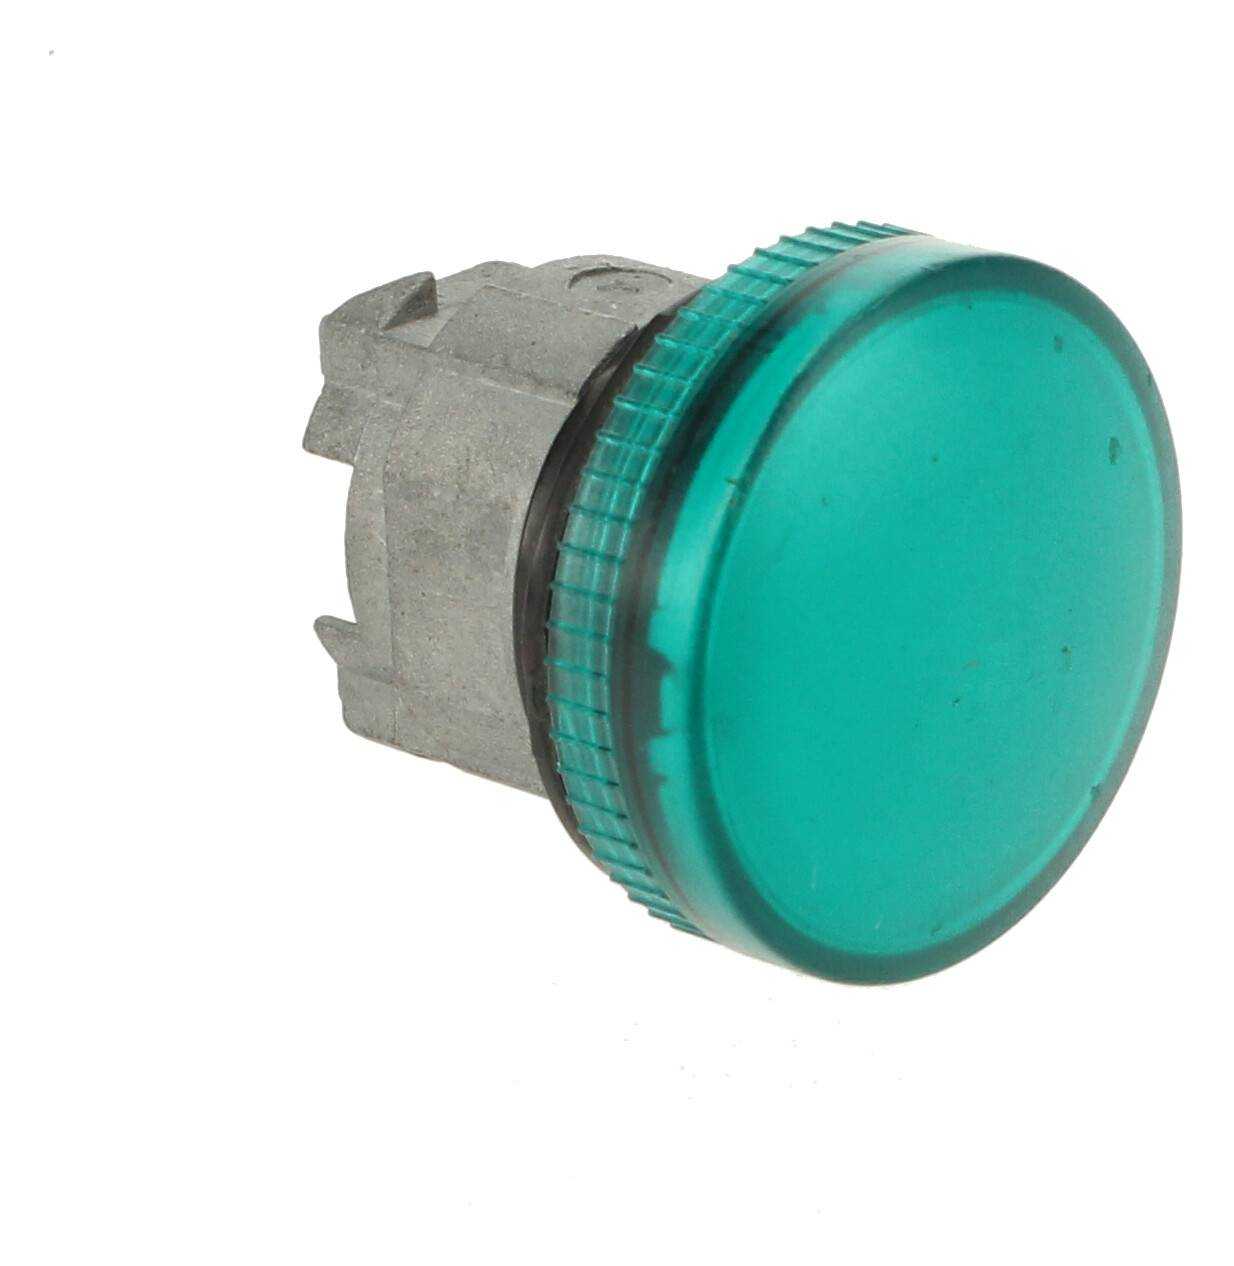 PUSH BUTTON HEAD ZB4BV03 GREEN SCHNEIDER (WITHOUT PACKAGING)